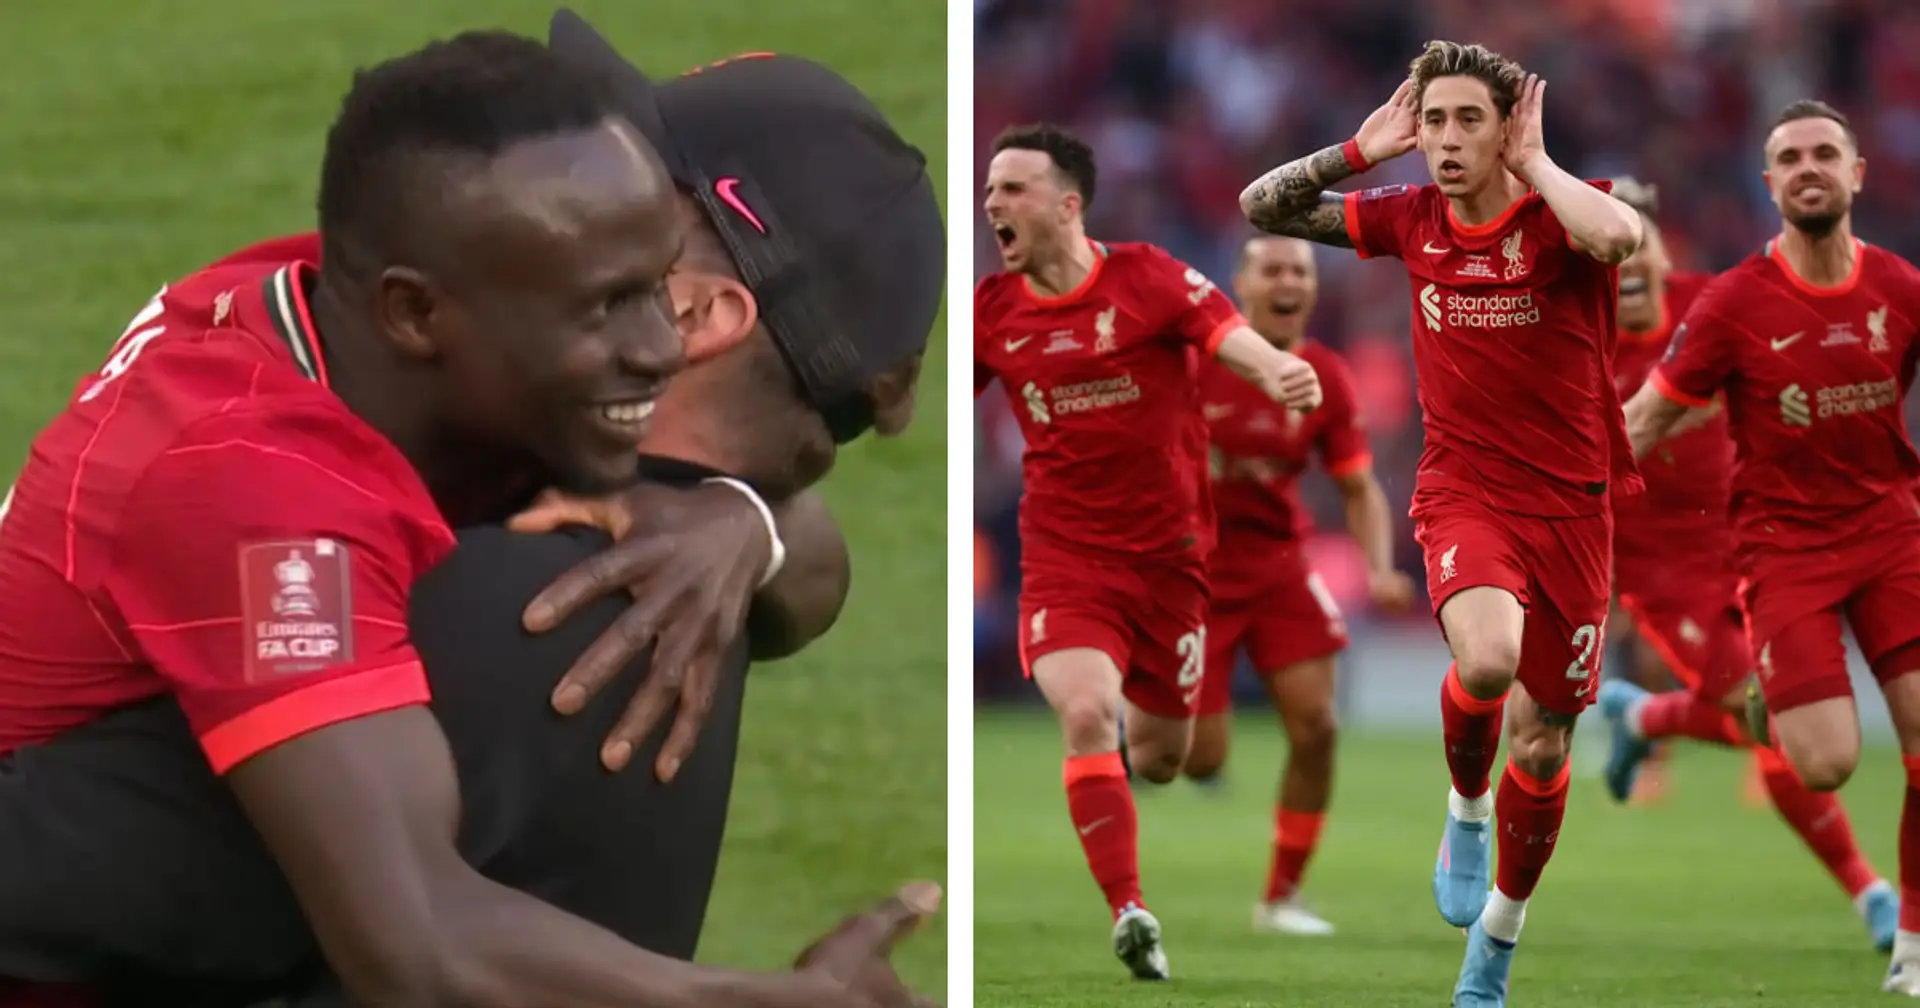 Liverpool wins FA Cup after defeating Chelsea on penalties